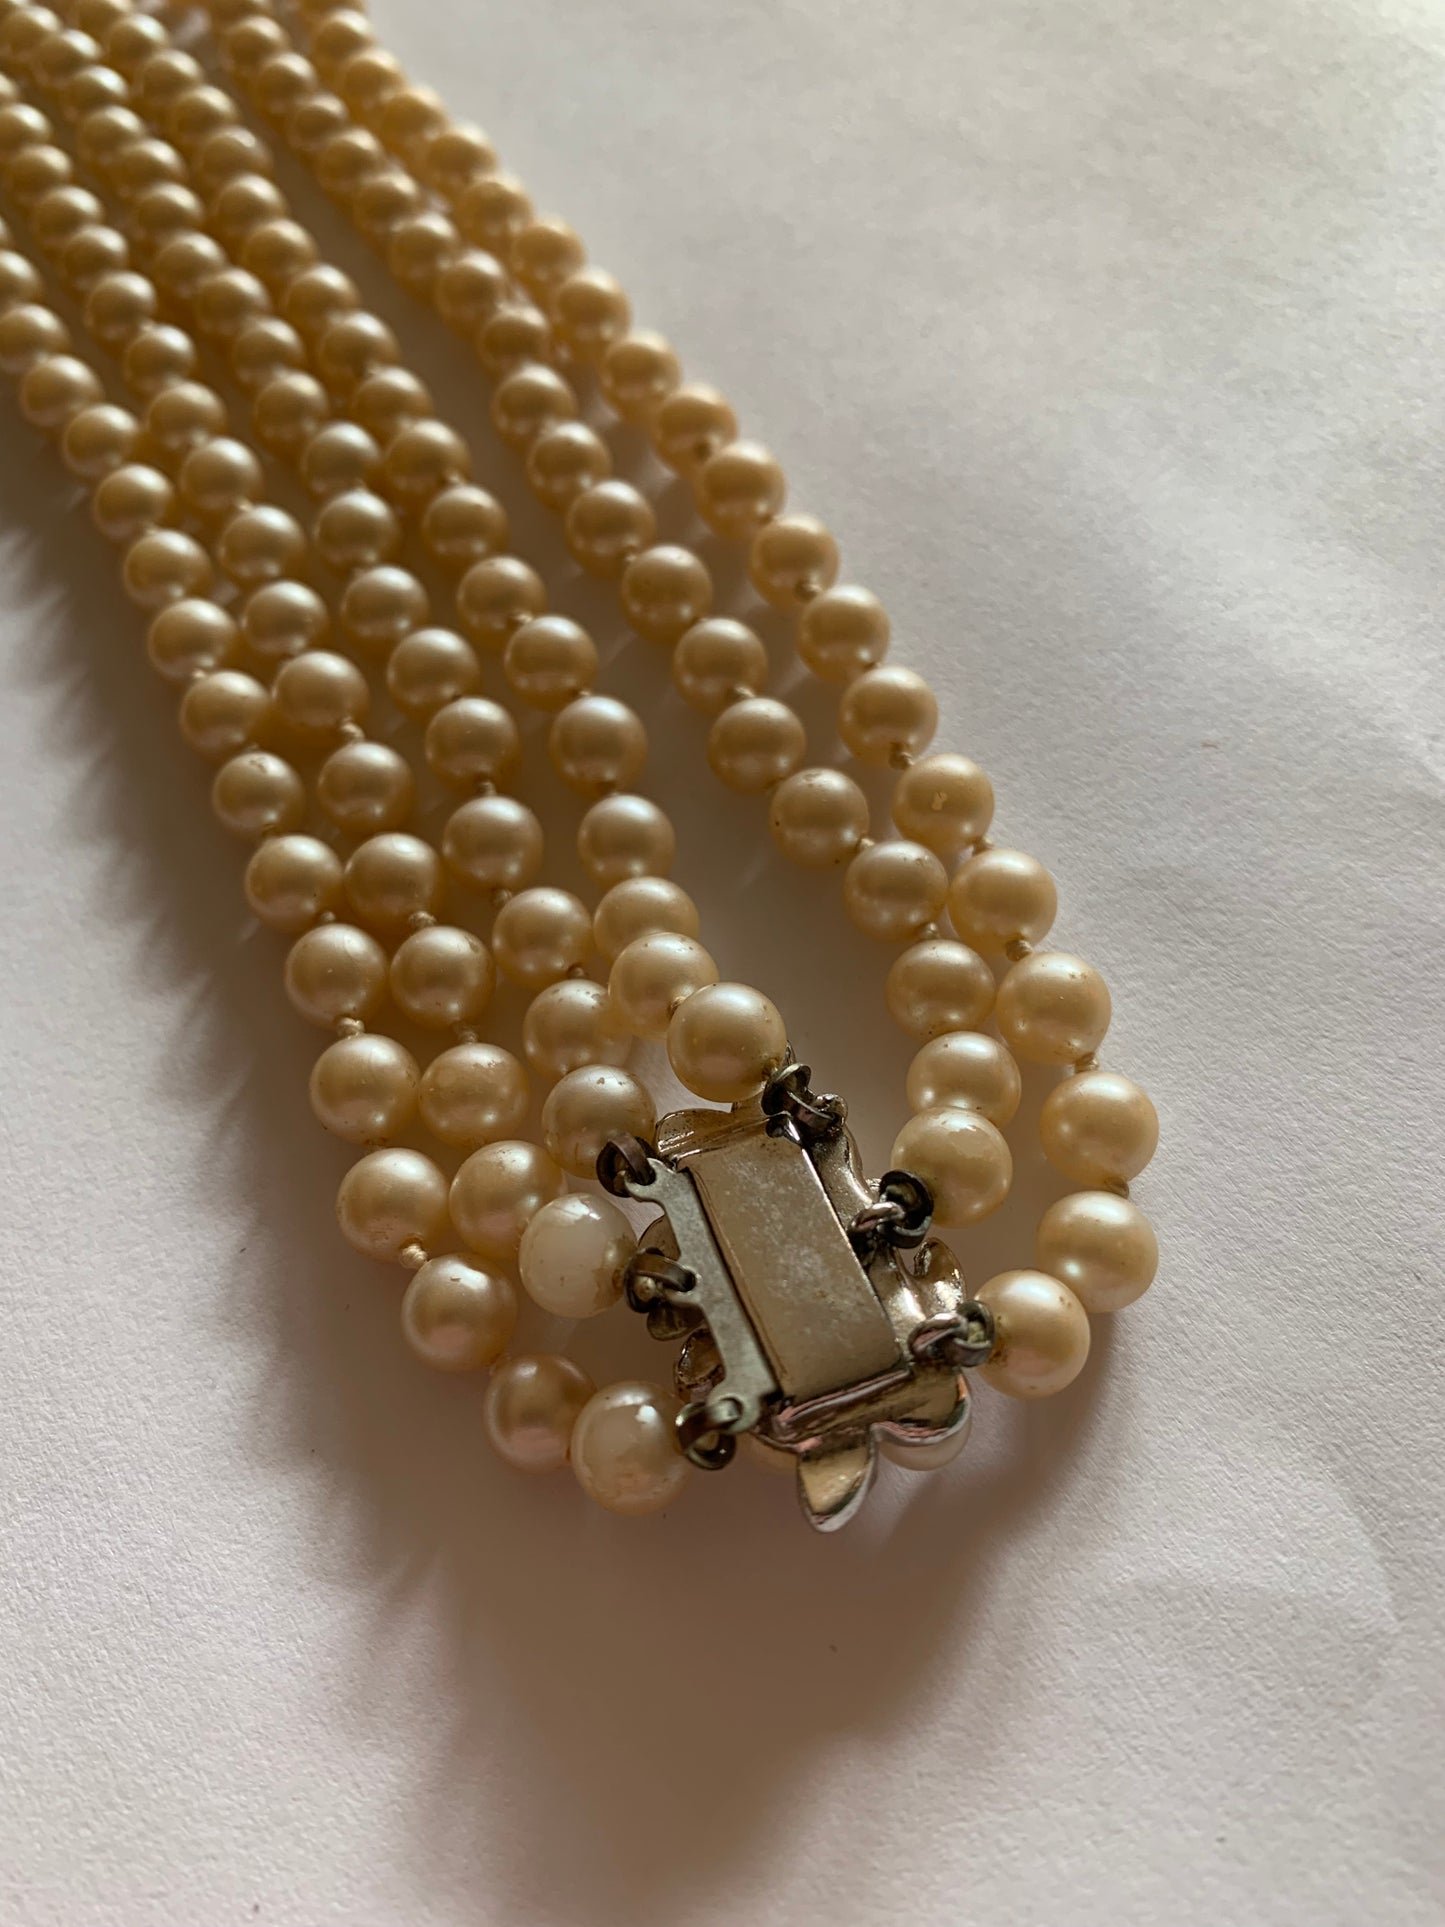 Triple Strand Faux Pearl Necklace with Rhinestones circa 1930s